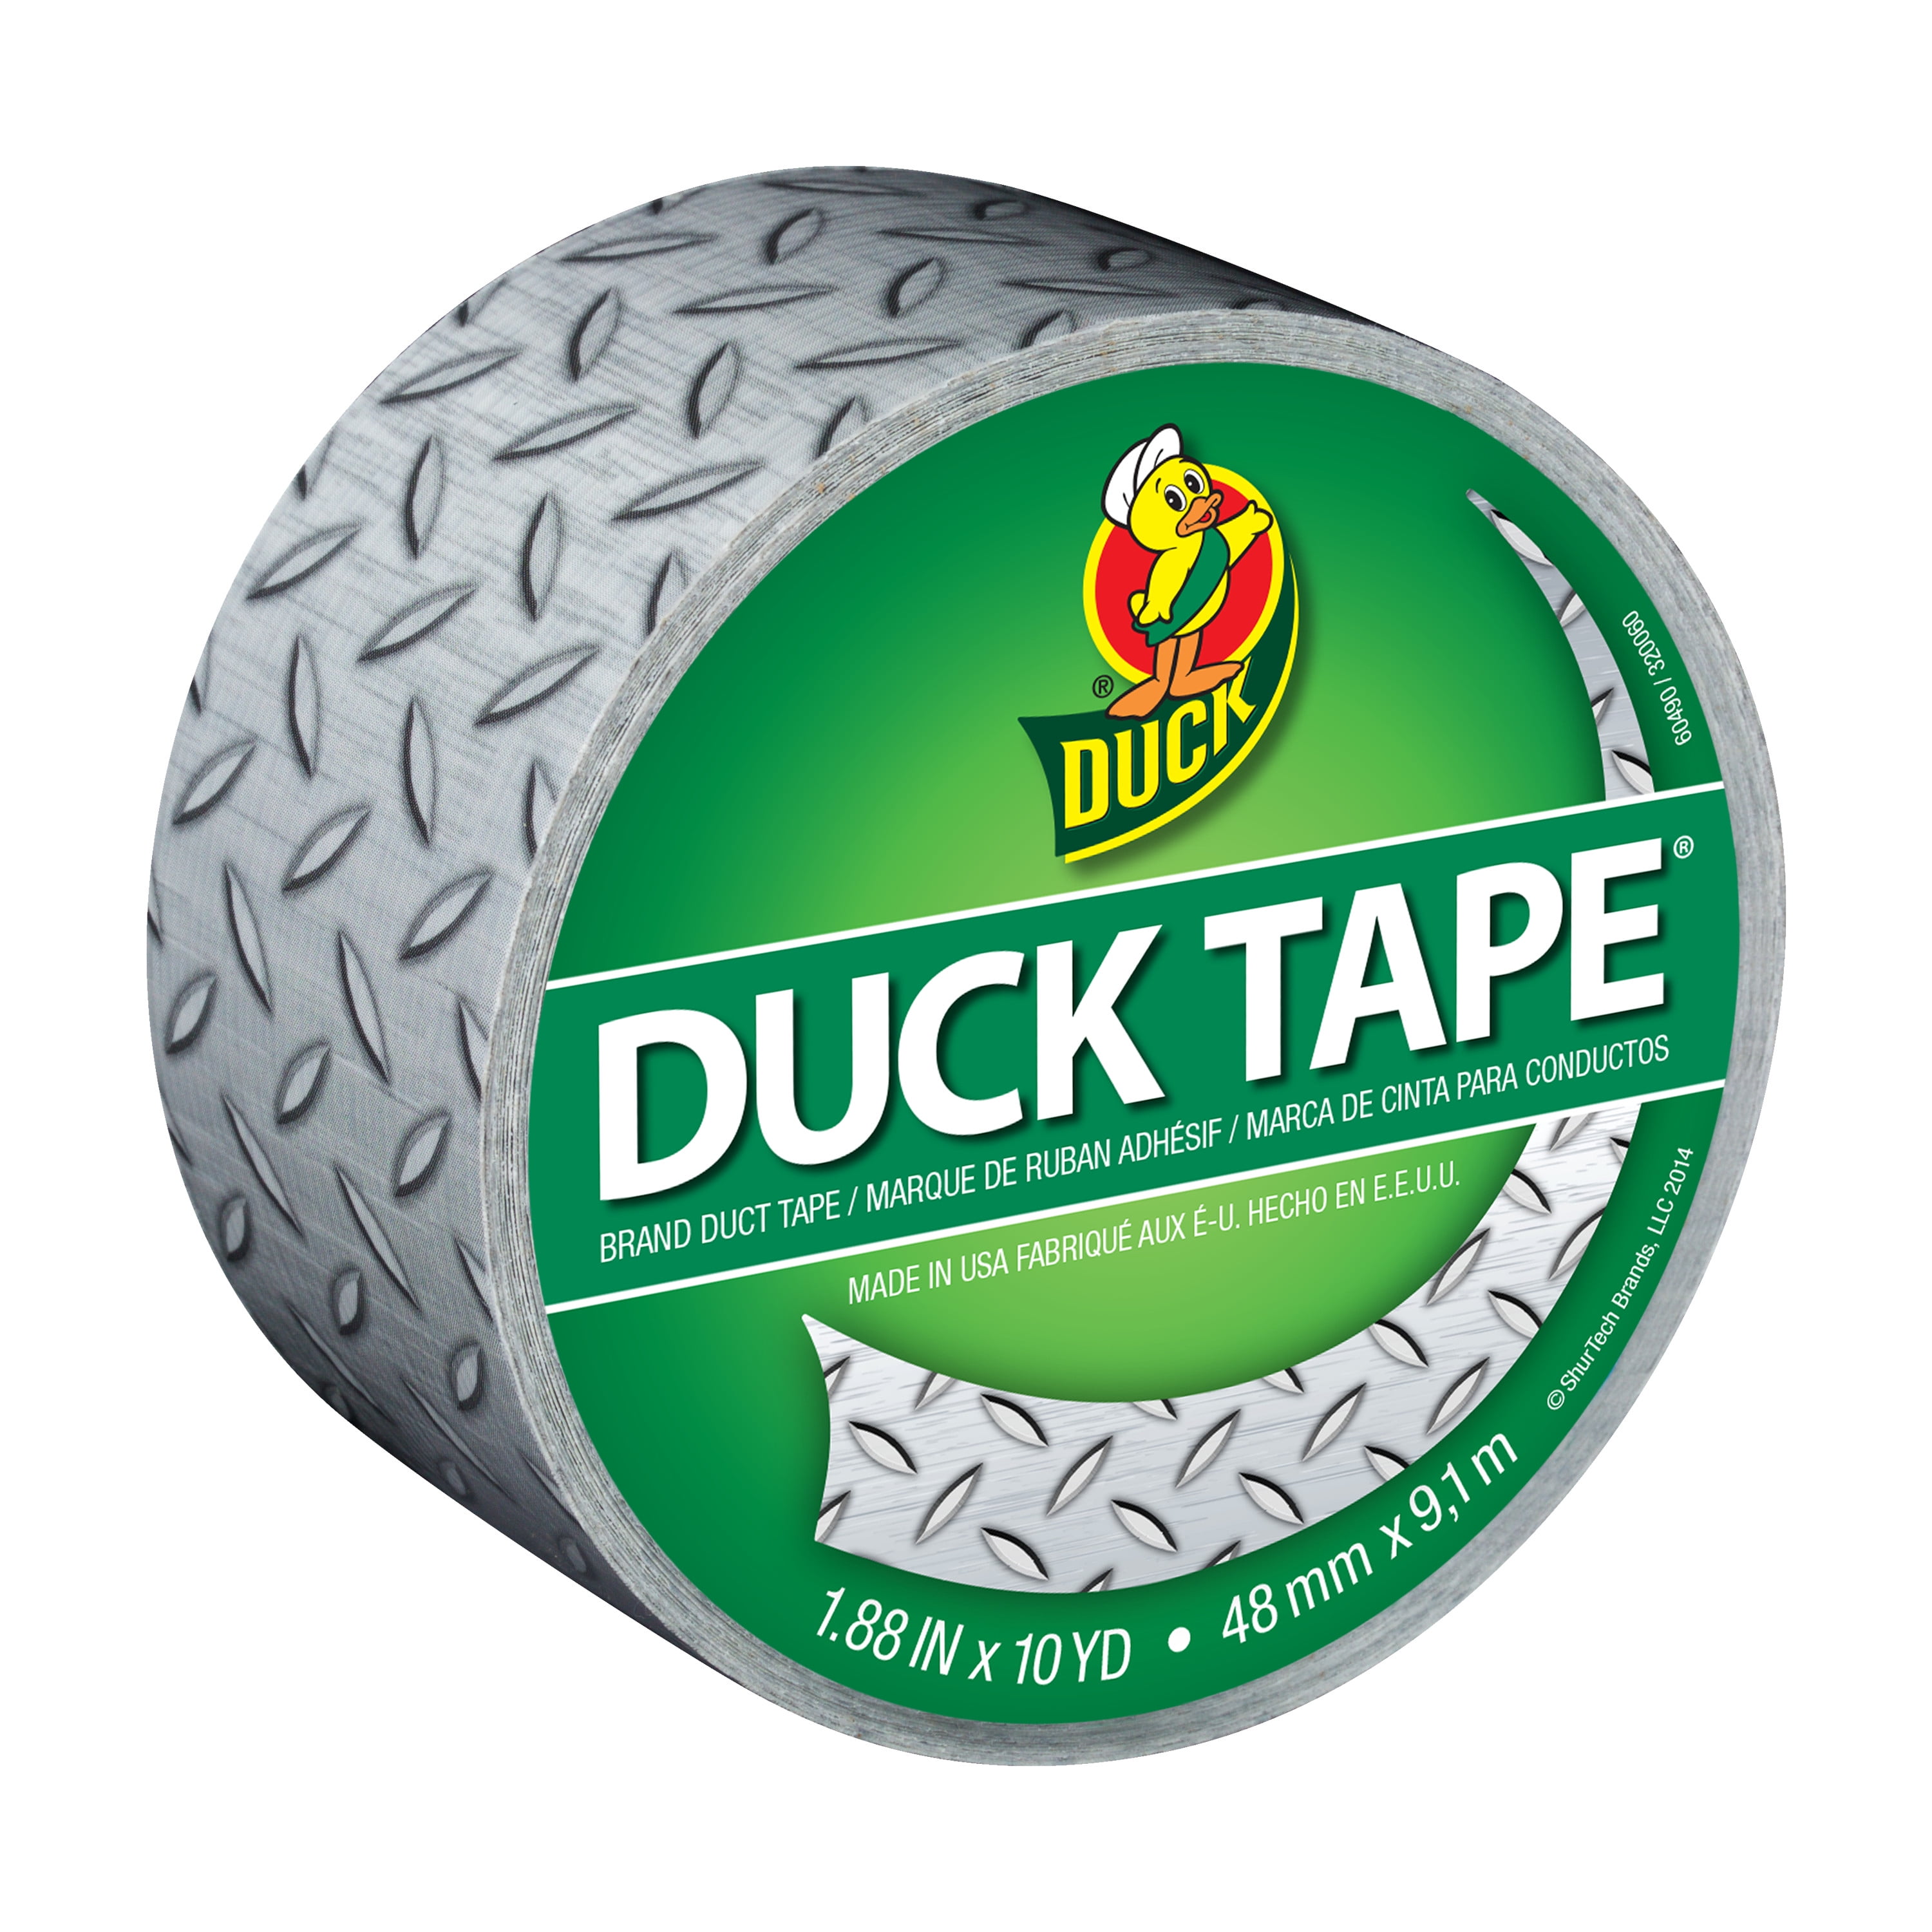 x 10 Yd X 9 mil Printed Rope Design Duct Tape 284566 Duck Tape 1.88 In 